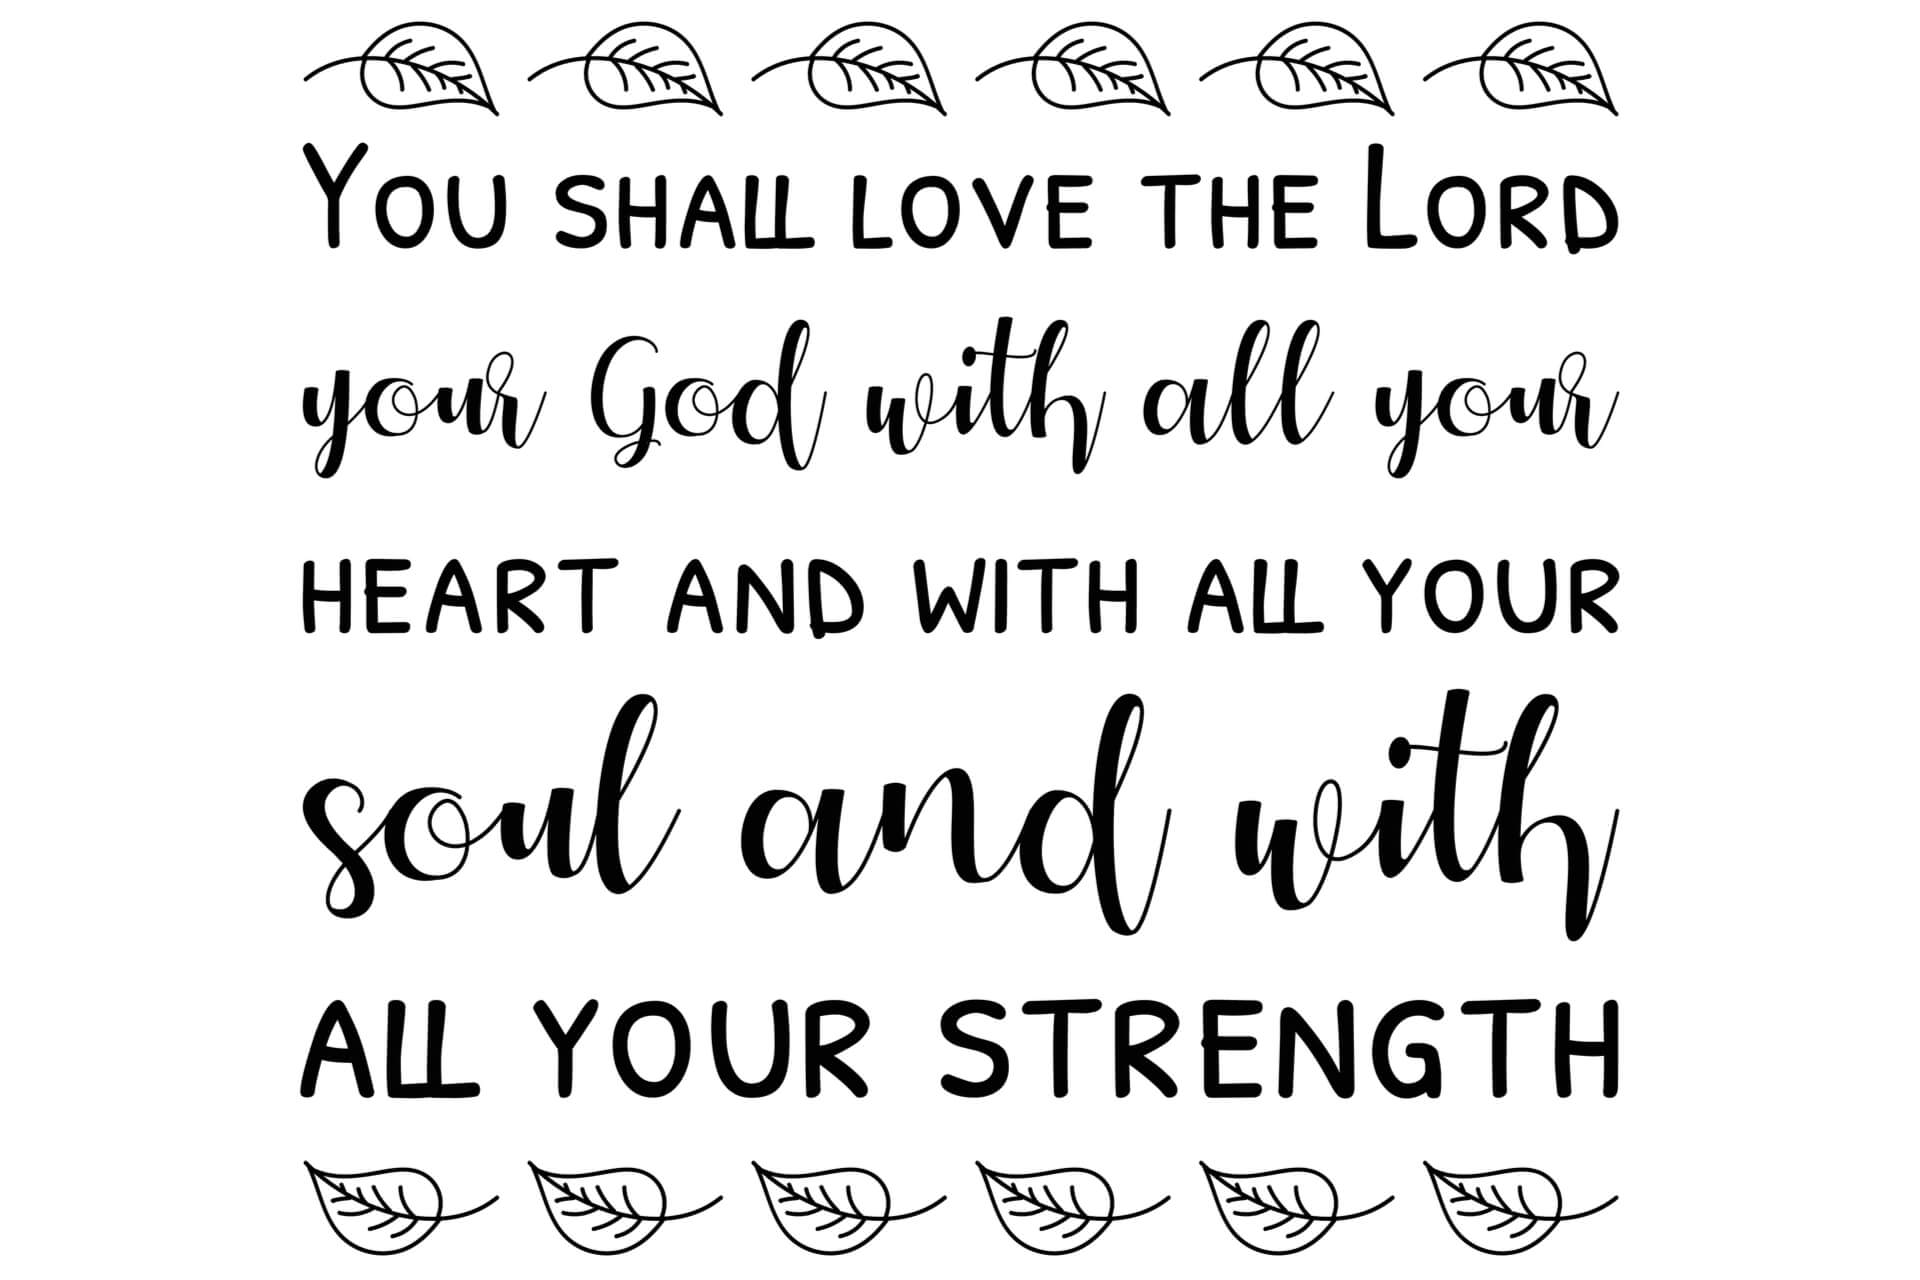 And you shall love the Lord your God with all your heart and with all your soul